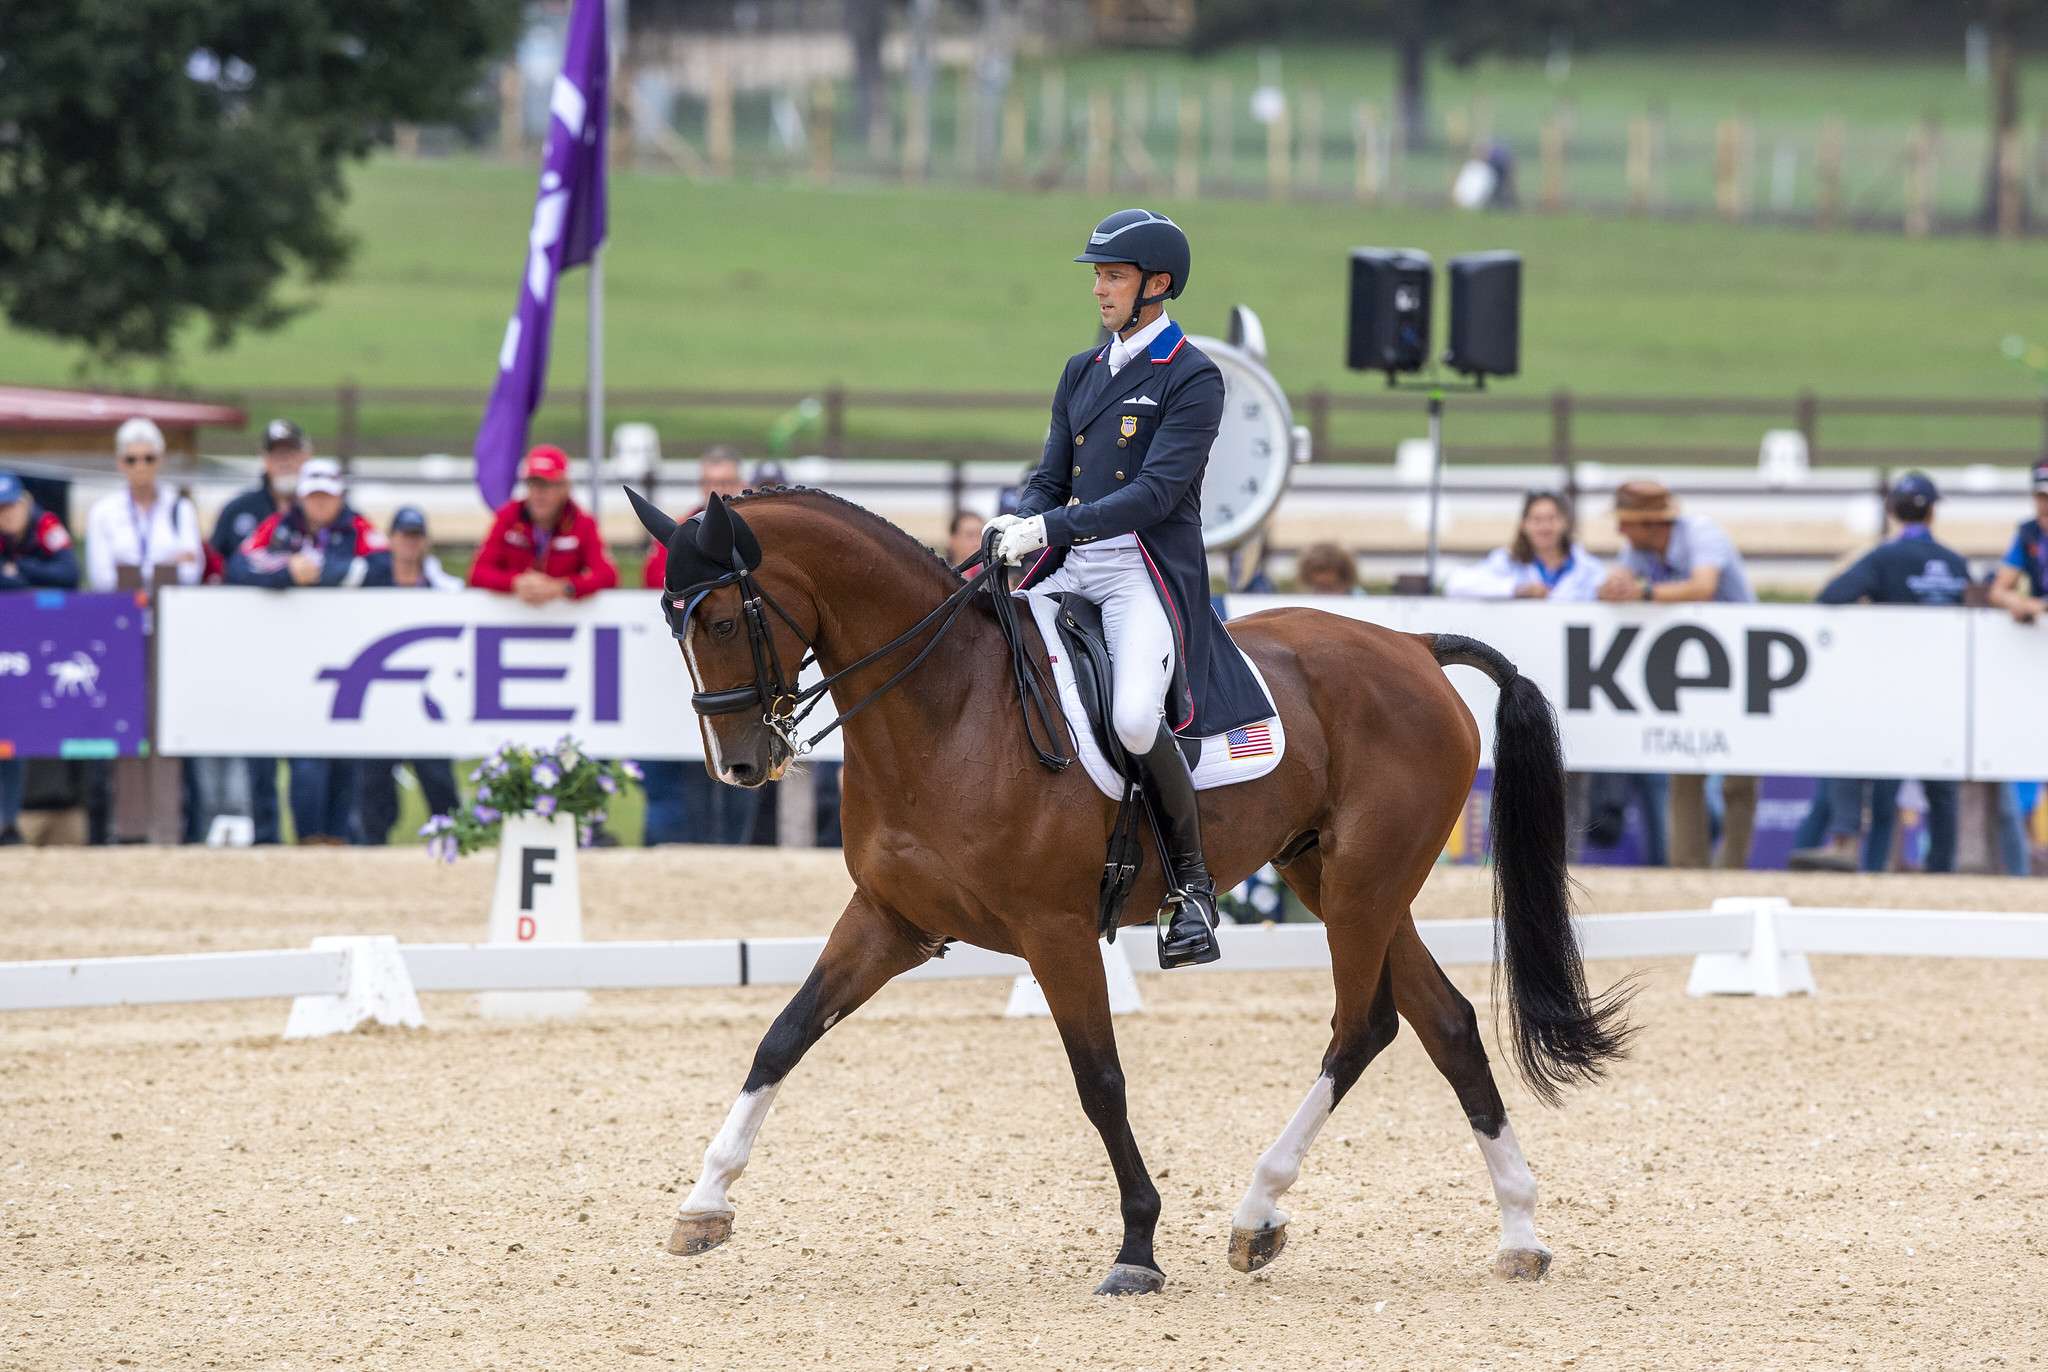 William COLEMAN (USA) rides Off The Record on 15 September 2022 FEI / Richard Juilliart